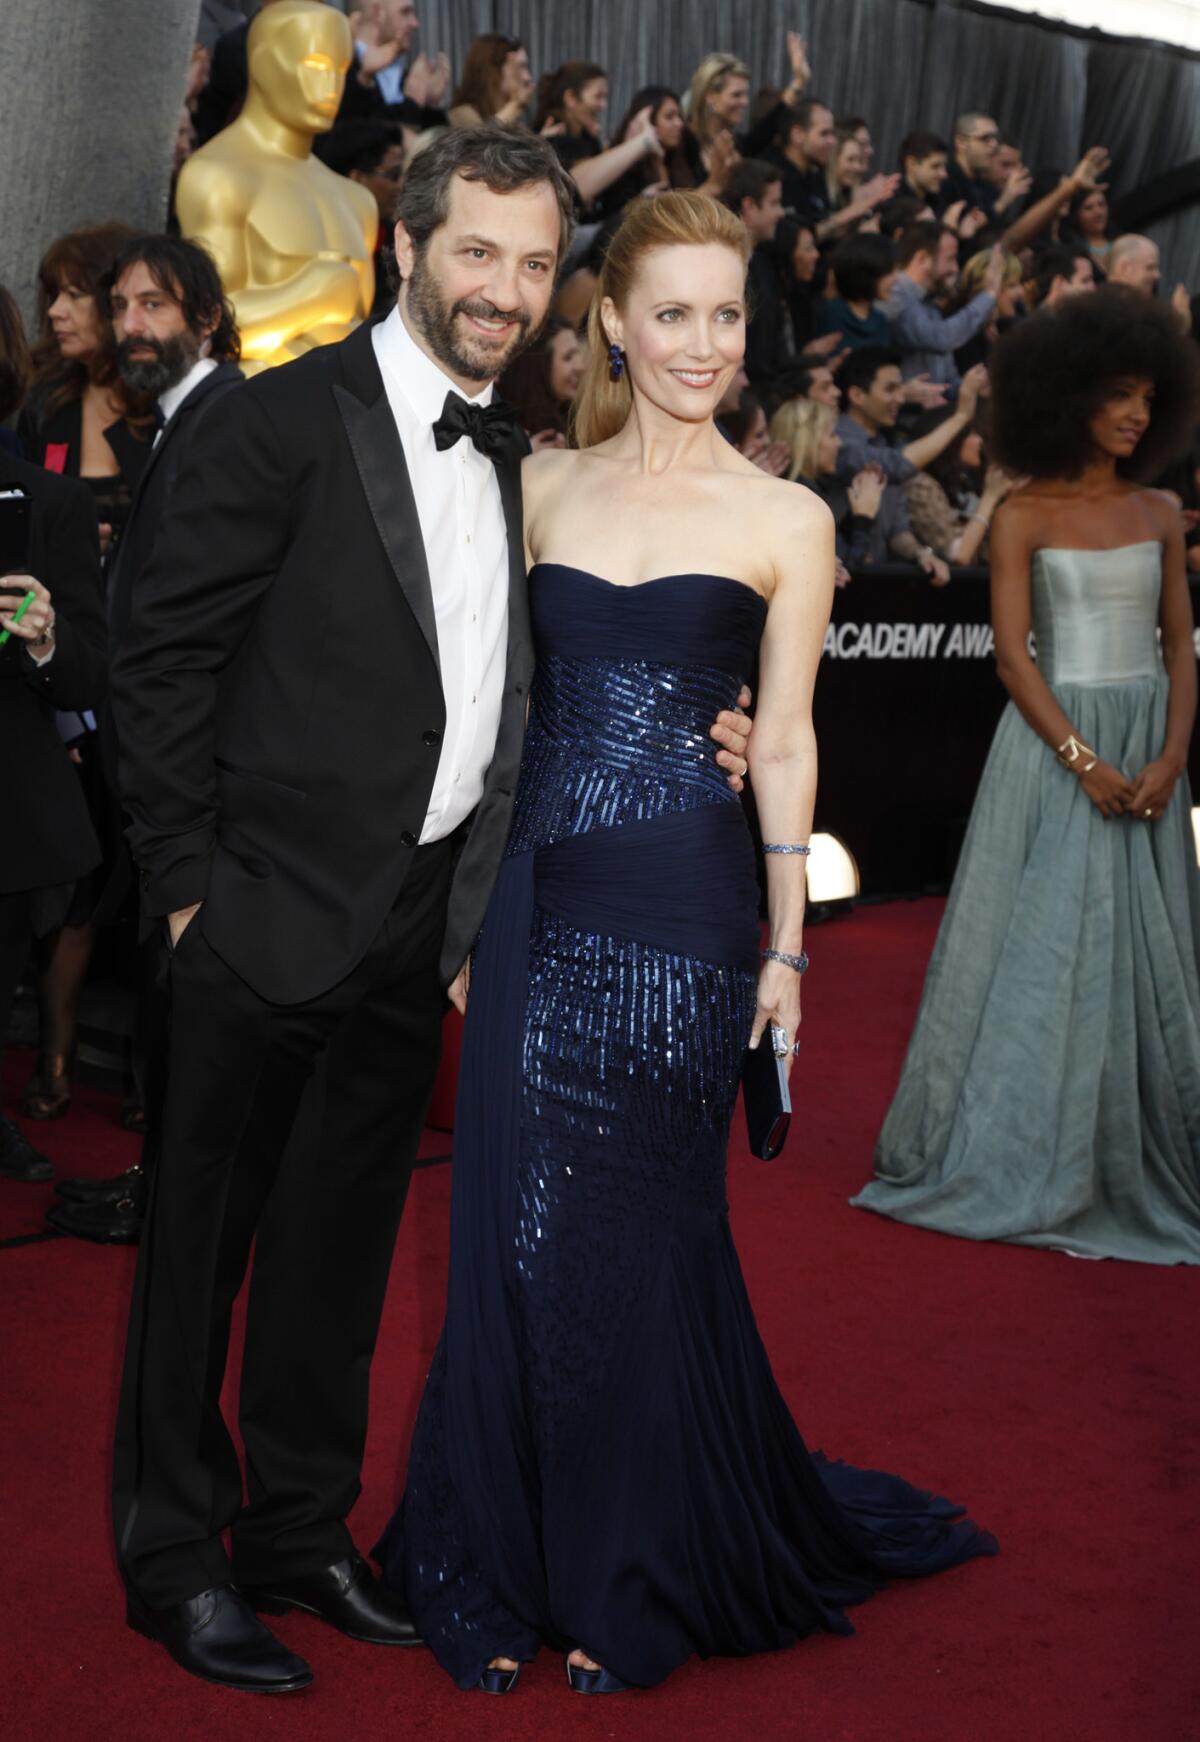 Judd Apatow and Leslie Mann attend the 84th Annual Academy Awards in 2012.